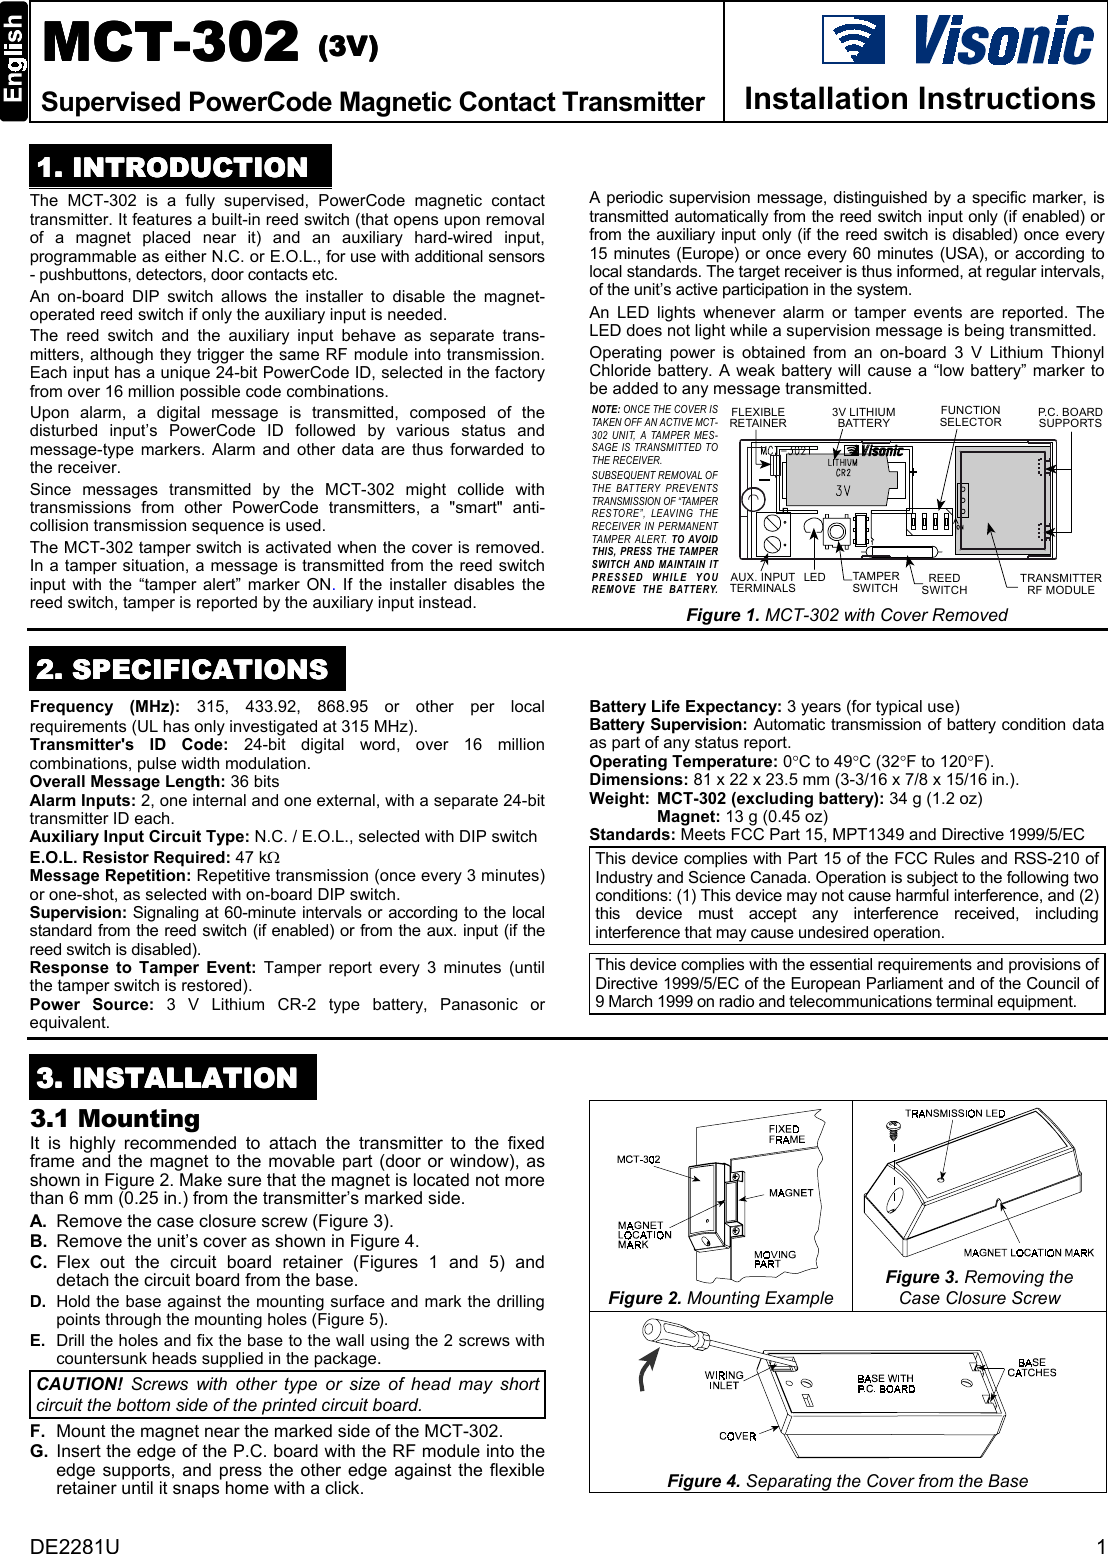 DE2281U 1MCTMCTMCTMCT-302-302-302-302    ((((3333V)V)V)V)Supervised PowerCode Magnetic Contact Transmitter Installation Instructions1111. INTRODUCTION. INTRODUCTION. INTRODUCTION. INTRODUCTIONThe MCT-302 is a fully supervised, PowerCode magnetic contacttransmitter. It features a built-in reed switch (that opens upon removalof a magnet placed near it) and an auxiliary hard-wired input,programmable as either N.C. or E.O.L., for use with additional sensors- pushbuttons, detectors, door contacts etc.An on-board DIP switch allows the installer to disable the magnet-operated reed switch if only the auxiliary input is needed.The reed switch and the auxiliary input behave as separate trans-mitters, although they trigger the same RF module into transmission.Each input has a unique 24-bit PowerCode ID, selected in the factoryfrom over 16 million possible code combinations.  Upon alarm, a digital message is transmitted, composed of thedisturbed input’s PowerCode ID followed by various status andmessage-type markers. Alarm and other data are thus forwarded tothe receiver.Since messages transmitted by the MCT-302 might collide withtransmissions from other PowerCode transmitters, a &quot;smart&quot; anti-collision transmission sequence is used.The MCT-302 tamper switch is activated when the cover is removed.In a tamper situation, a message is transmitted from the reed switchinput with the “tamper alert” marker ON.  If the installer disables thereed switch, tamper is reported by the auxiliary input instead.A periodic supervision message, distinguished by a specific marker, istransmitted automatically from the reed switch input only (if enabled) orfrom the auxiliary input only (if the reed switch is disabled) once every15 minutes (Europe) or once every 60 minutes (USA), or according tolocal standards. The target receiver is thus informed, at regular intervals,of the unit’s active participation in the system.An LED lights whenever alarm or tamper events are reported. TheLED does not light while a supervision message is being transmitted.Operating power is obtained from an on-board 3 V Lithium ThionylChloride battery. A weak battery will cause a “low battery” marker tobe added to any message transmitted.FUNCTIONSELECTORTRANSMITTERRF MODULETAMPE RSWITCHAUX. INPUTTERMINALS3V LITHIUMBATTERYREEDSWITCHLEDFLEXIBLERETAINERP. C .  B O A R DSUPPORTSNOTE: ONCE THE COVER ISTAKEN OFF AN ACTIVE MCT-302 UNIT, A TAMPER MES-SAGE IS TRANSMITTED TOTHE RECEIVER.SUBSEQUENT REMOVAL OFTHE BATTERY PREVENTSTRANSMISSION OF “TAMPERRESTORE”, LEAVING THERECEIVER IN PERMANENTTAMPER ALERT. TO AVOIDTHIS, PRESS THE TAMPERSWITCH AND MAINTAIN ITPRESSED WHILE YOUREMOVE THE BATTERY.Figure 1. MCT-302 with Cover Removed2222. SPECIFICATIONS. SPECIFICATIONS. SPECIFICATIONS. SPECIFICATIONSFrequency (MHz): 315, 433.92, 868.95 or other per localrequirements (UL has only investigated at 315 MHz).Transmitter&apos;s ID Code: 24-bit digital word, over 16 millioncombinations, pulse width modulation.Overall Message Length: 36 bitsAlarm Inputs: 2, one internal and one external, with a separate 24-bittransmitter ID each.Auxiliary Input Circuit Type: N.C. / E.O.L., selected with DIP switchE.O.L. Resistor Required: 47 kΩMessage Repetition: Repetitive transmission (once every 3 minutes)or one-shot, as selected with on-board DIP switch.Supervision: Signaling at 60-minute intervals or according to the localstandard from the reed switch (if enabled) or from the aux. input (if thereed switch is disabled).Response to Tamper Event: Tamper report every 3 minutes (untilthe tamper switch is restored).Power Source: 3 V Lithium CR-2 type battery, Panasonic orequivalent.Battery Life Expectancy: 3 years (for typical use)Battery Supervision: Automatic transmission of battery condition dataas part of any status report.Operating Temperature: 0°C to 49°C (32°F to 120°F).Dimensions: 81 x 22 x 23.5 mm (3-3/16 x 7/8 x 15/16 in.).Weight: MCT-302 (excluding battery): 34 g (1.2 oz)Magnet: 13 g (0.45 oz)Standards: Meets FCC Part 15, MPT1349 and Directive 1999/5/ECThis device complies with Part 15 of the FCC Rules and RSS-210 ofIndustry and Science Canada. Operation is subject to the following twoconditions: (1) This device may not cause harmful interference, and (2)this device must accept any interference received, includinginterference that may cause undesired operation.This device complies with the essential requirements and provisions ofDirective 1999/5/EC of the European Parliament and of the Council of9 March 1999 on radio and telecommunications terminal equipment.3333. INSTALLATION. INSTALLATION. INSTALLATION. INSTALLATION3.1 MountingIt is highly recommended to attach the transmitter to the fixedframe and the magnet to the movable part (door or window), asshown in Figure 2. Make sure that the magnet is located not morethan 6 mm (0.25 in.) from the transmitter’s marked side.A. Remove the case closure screw (Figure 3).B. Remove the unit’s cover as shown in Figure 4.C. Flex out the circuit board retainer (Figures 1 and 5) anddetach the circuit board from the base.D. Hold the base against the mounting surface and mark the drillingpoints through the mounting holes (Figure 5).E. Drill the holes and fix the base to the wall using the 2 screws withcountersunk heads supplied in the package.CAUTION! Screws with other type or size of head may shortcircuit the bottom side of the printed circuit board.F. Mount the magnet near the marked side of the MCT-302.G. Insert the edge of the P.C. board with the RF module into theedge supports, and press the other edge against the flexibleretainer until it snaps home with a click.Figure 2. Mounting ExampleFigure 3. Removing theCase Closure ScrewFigure 4. Separating the Cover from the Base